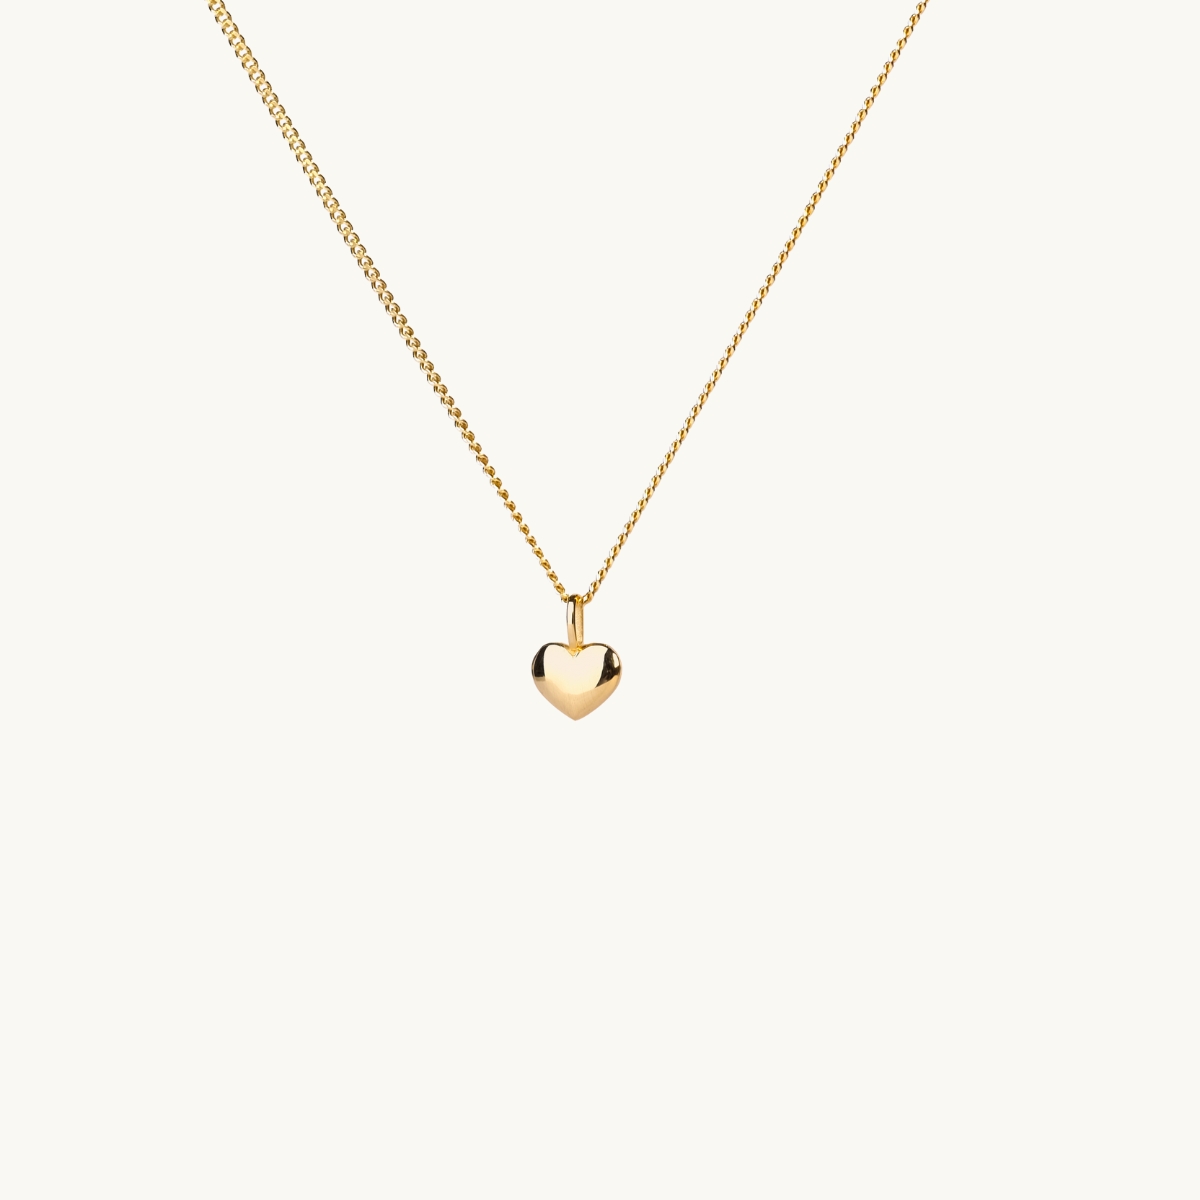 A necklace with a small filled gold heart